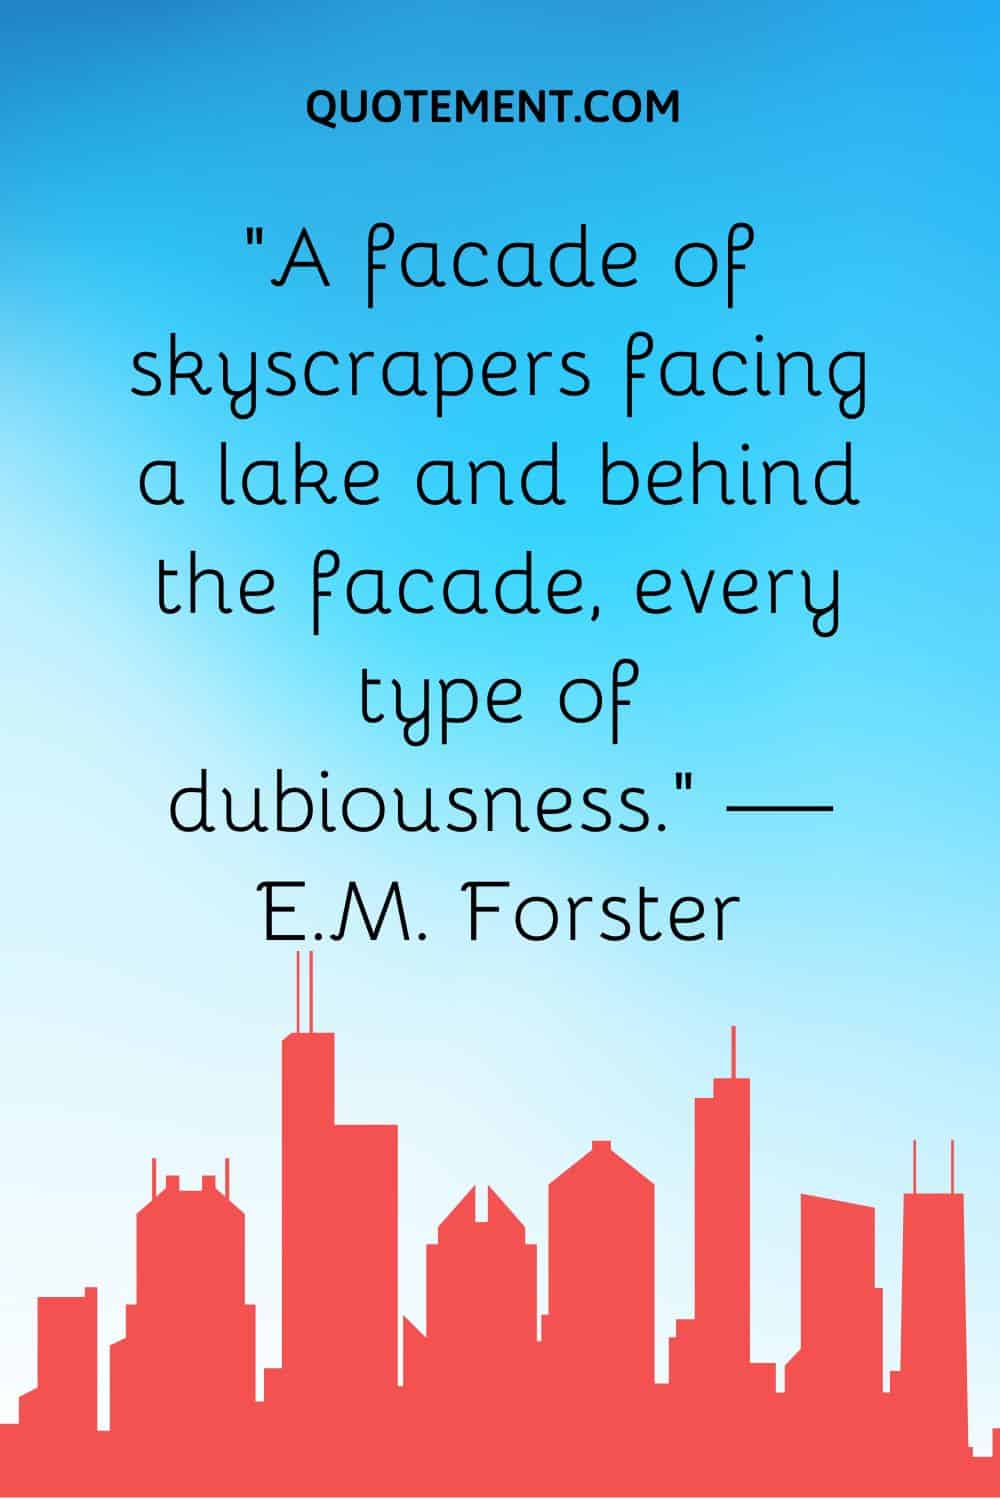 “A facade of skyscrapers facing a lake and behind the facade, every type of dubiousness.” — E.M. Forster